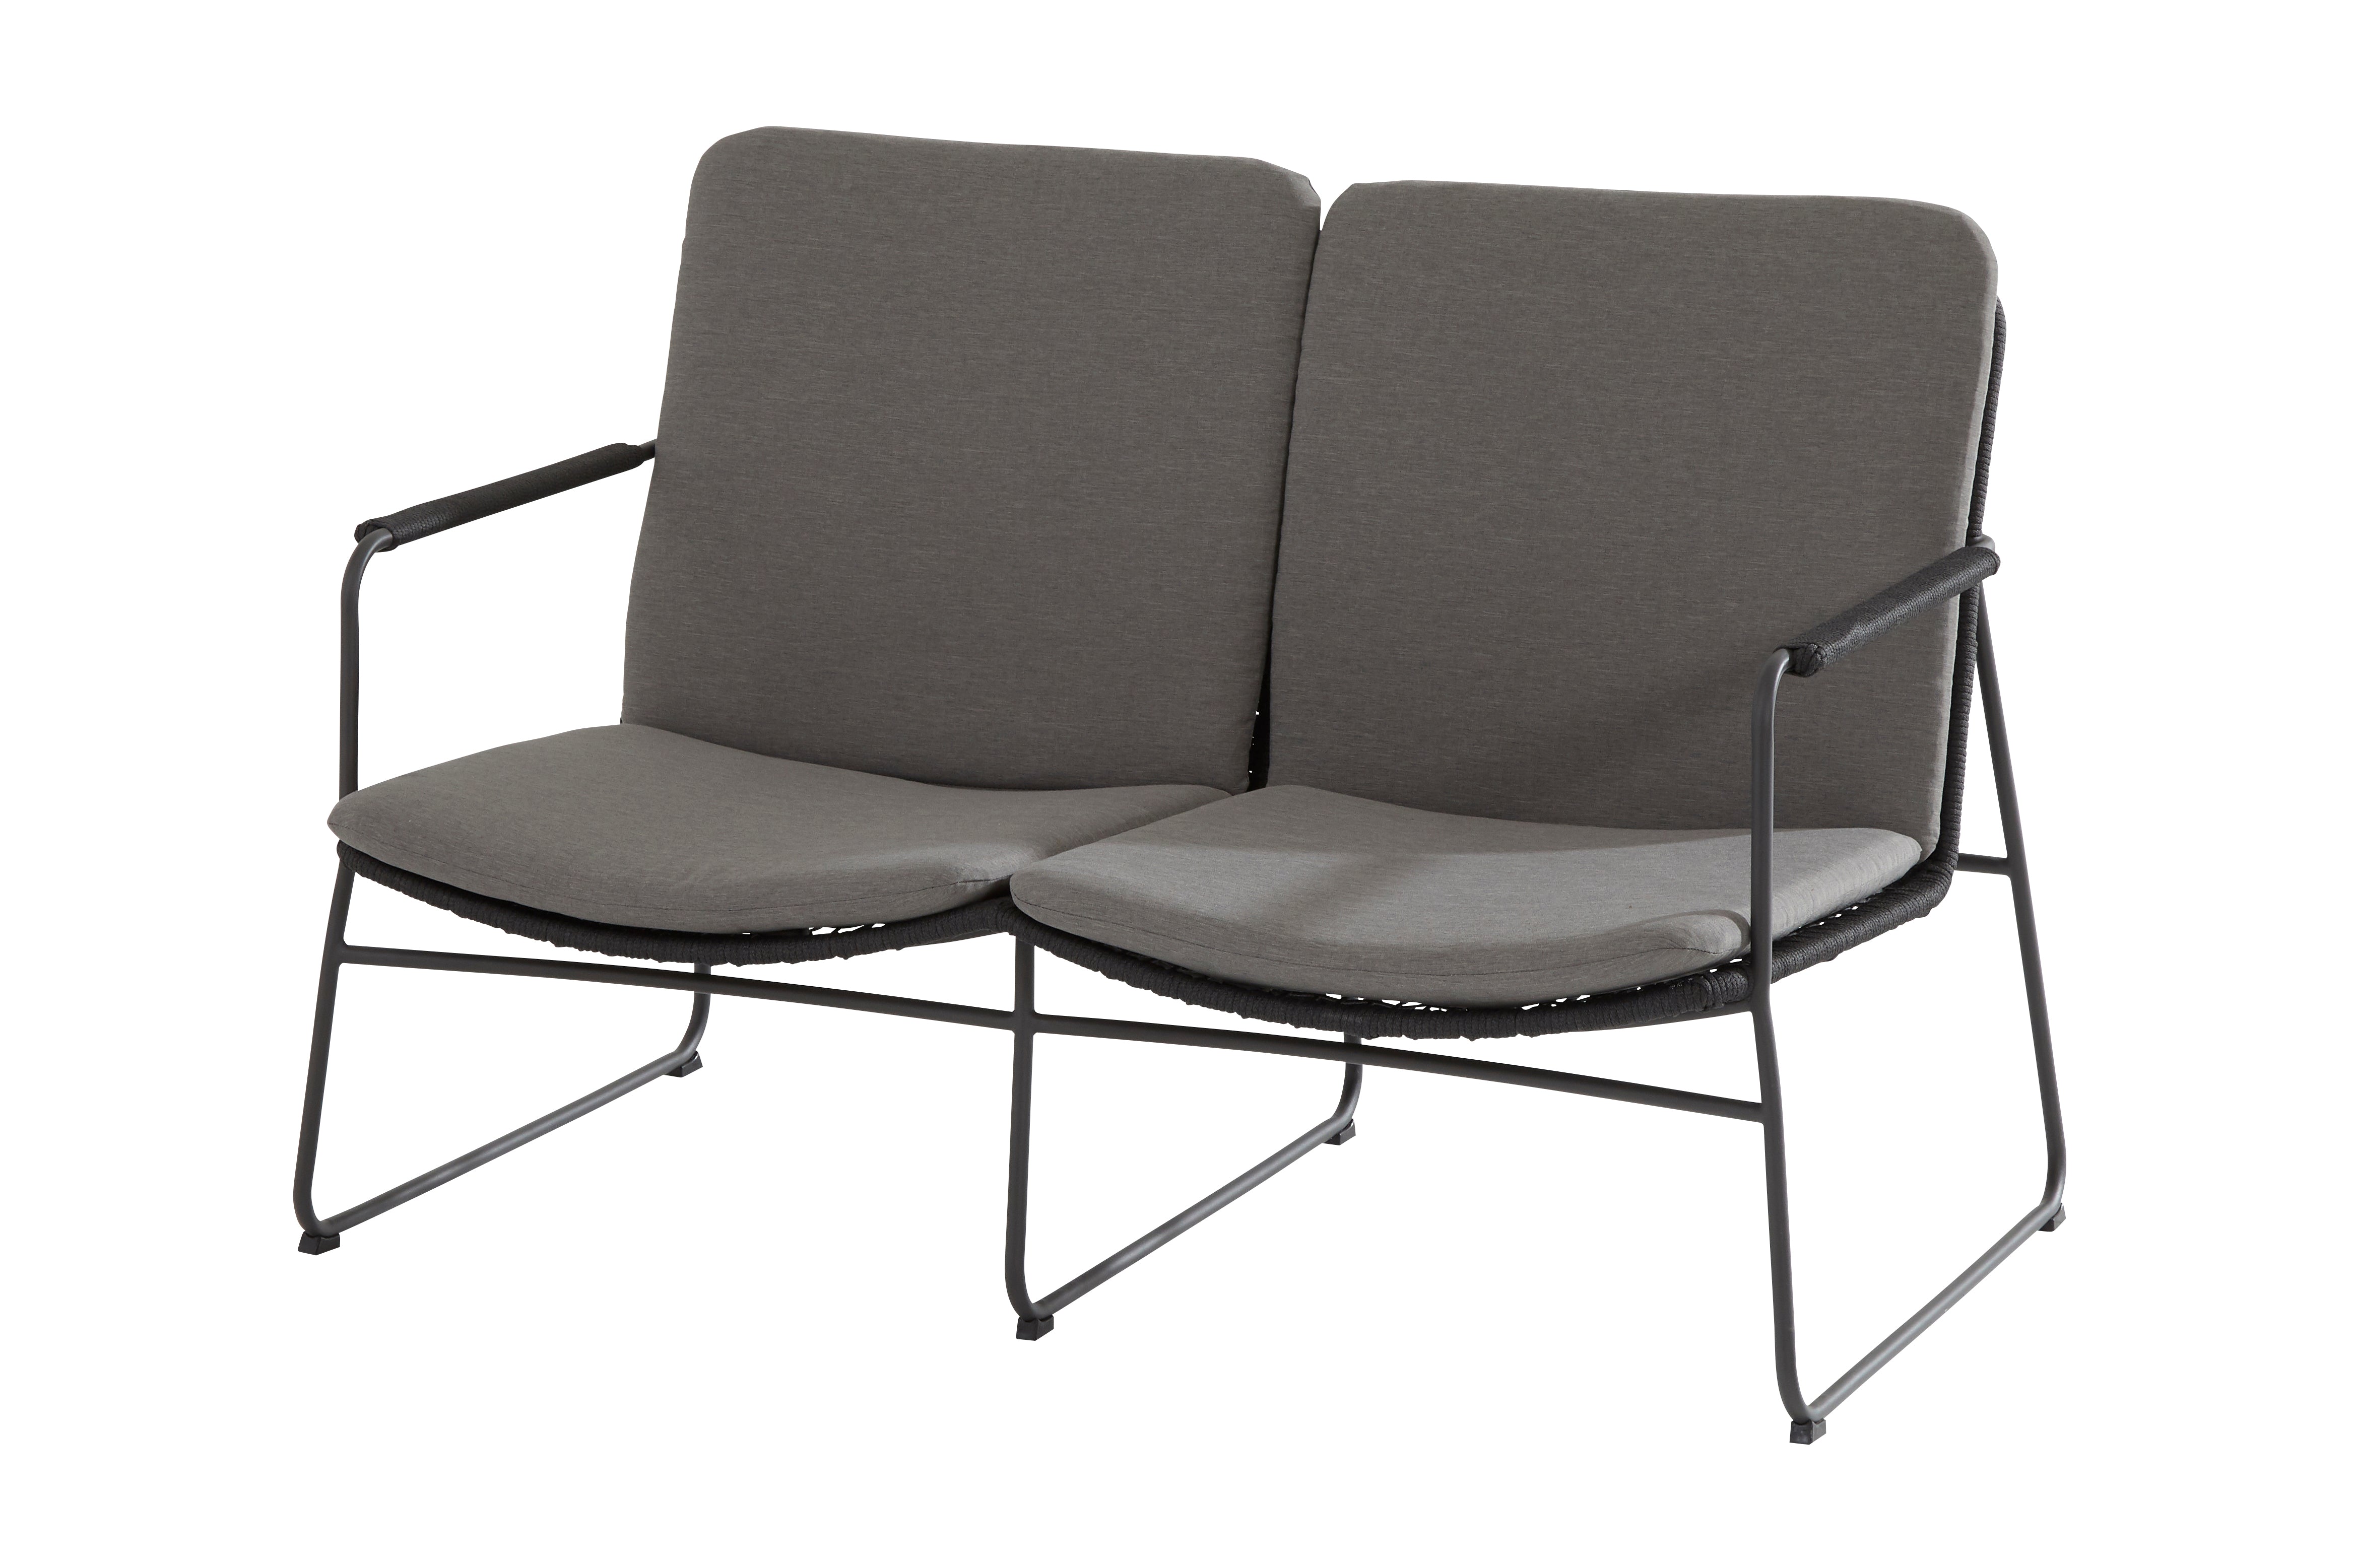 4 Seasons Outdoor Elba Living Bench 2 Seater With Seat And Back Cushions